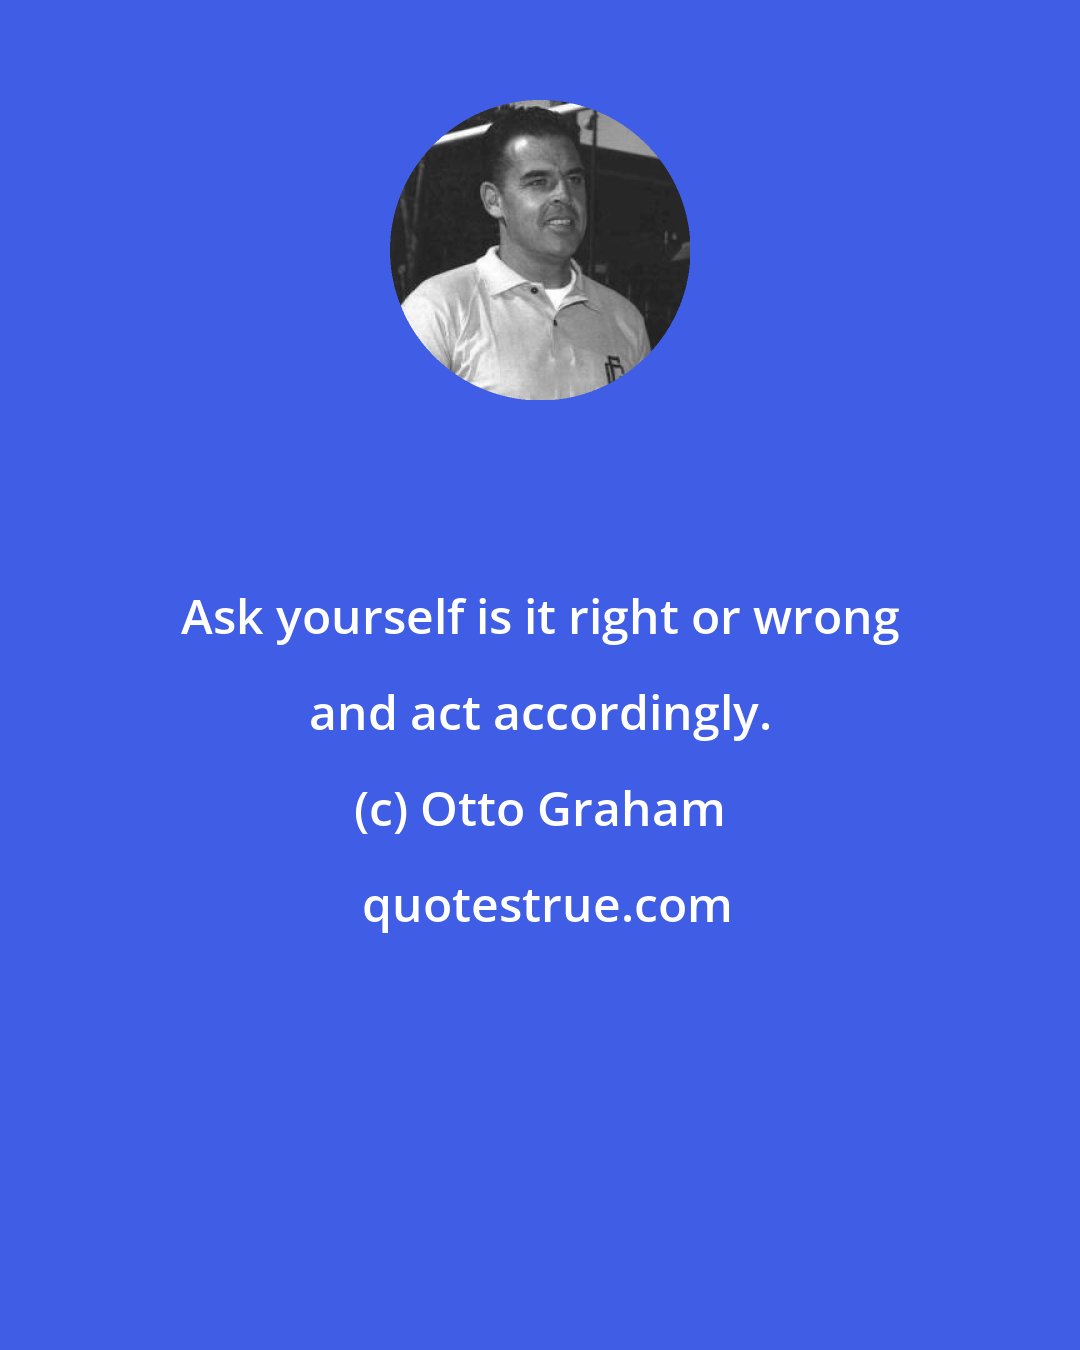 Otto Graham: Ask yourself is it right or wrong and act accordingly.